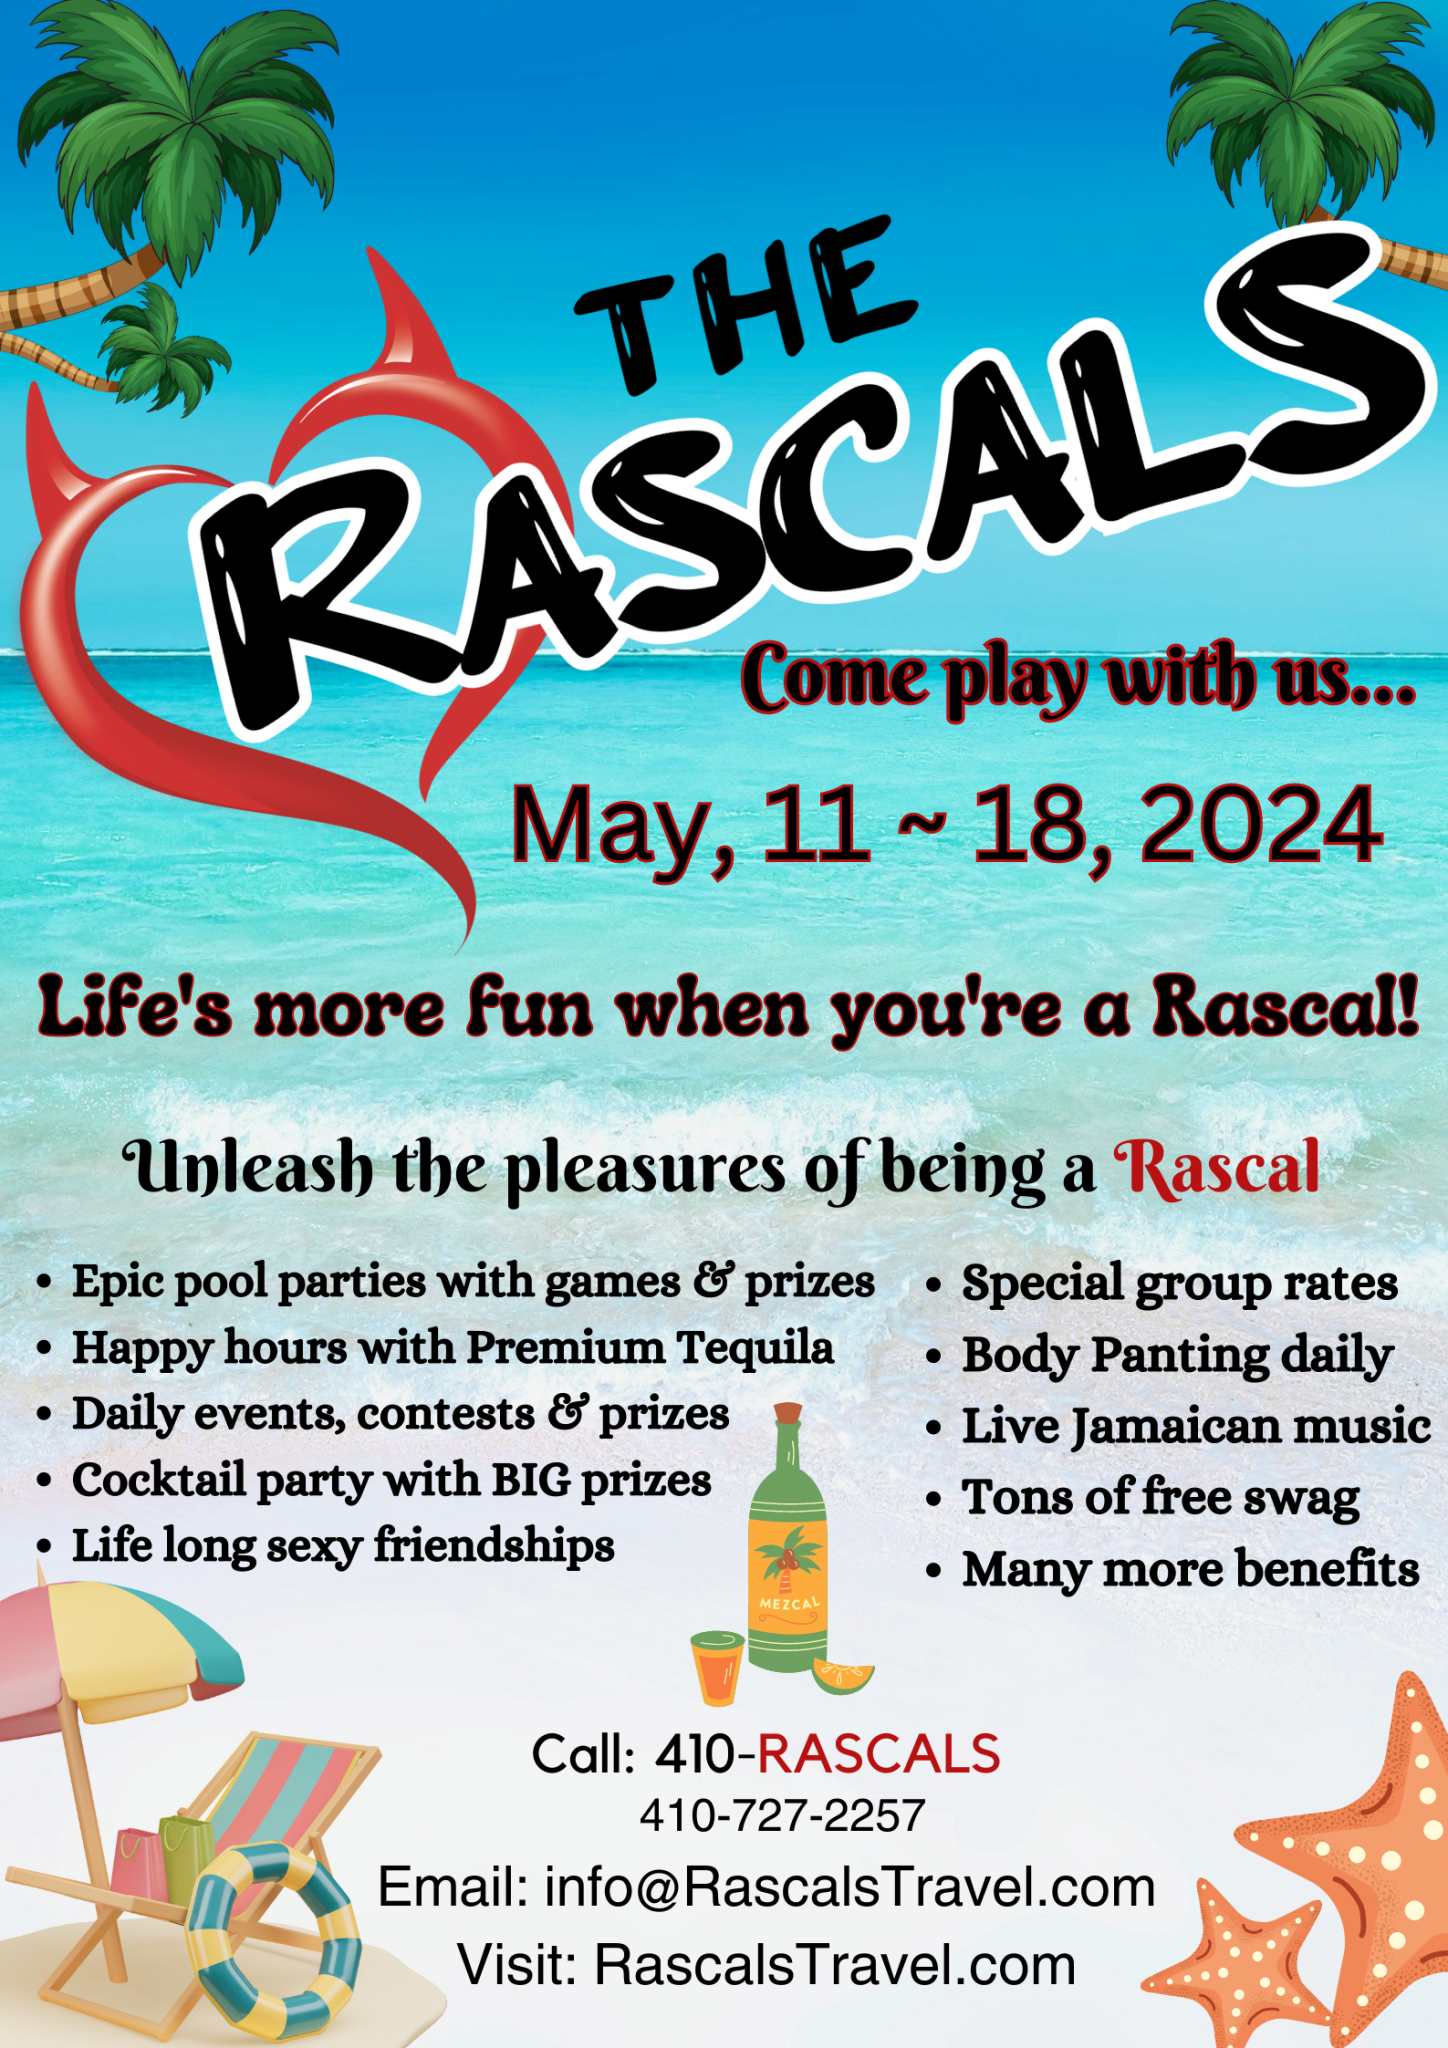 Group Event - The Rascals - May 11 - 18, 2024 - Hedonism II Resort, Negril Jamaica